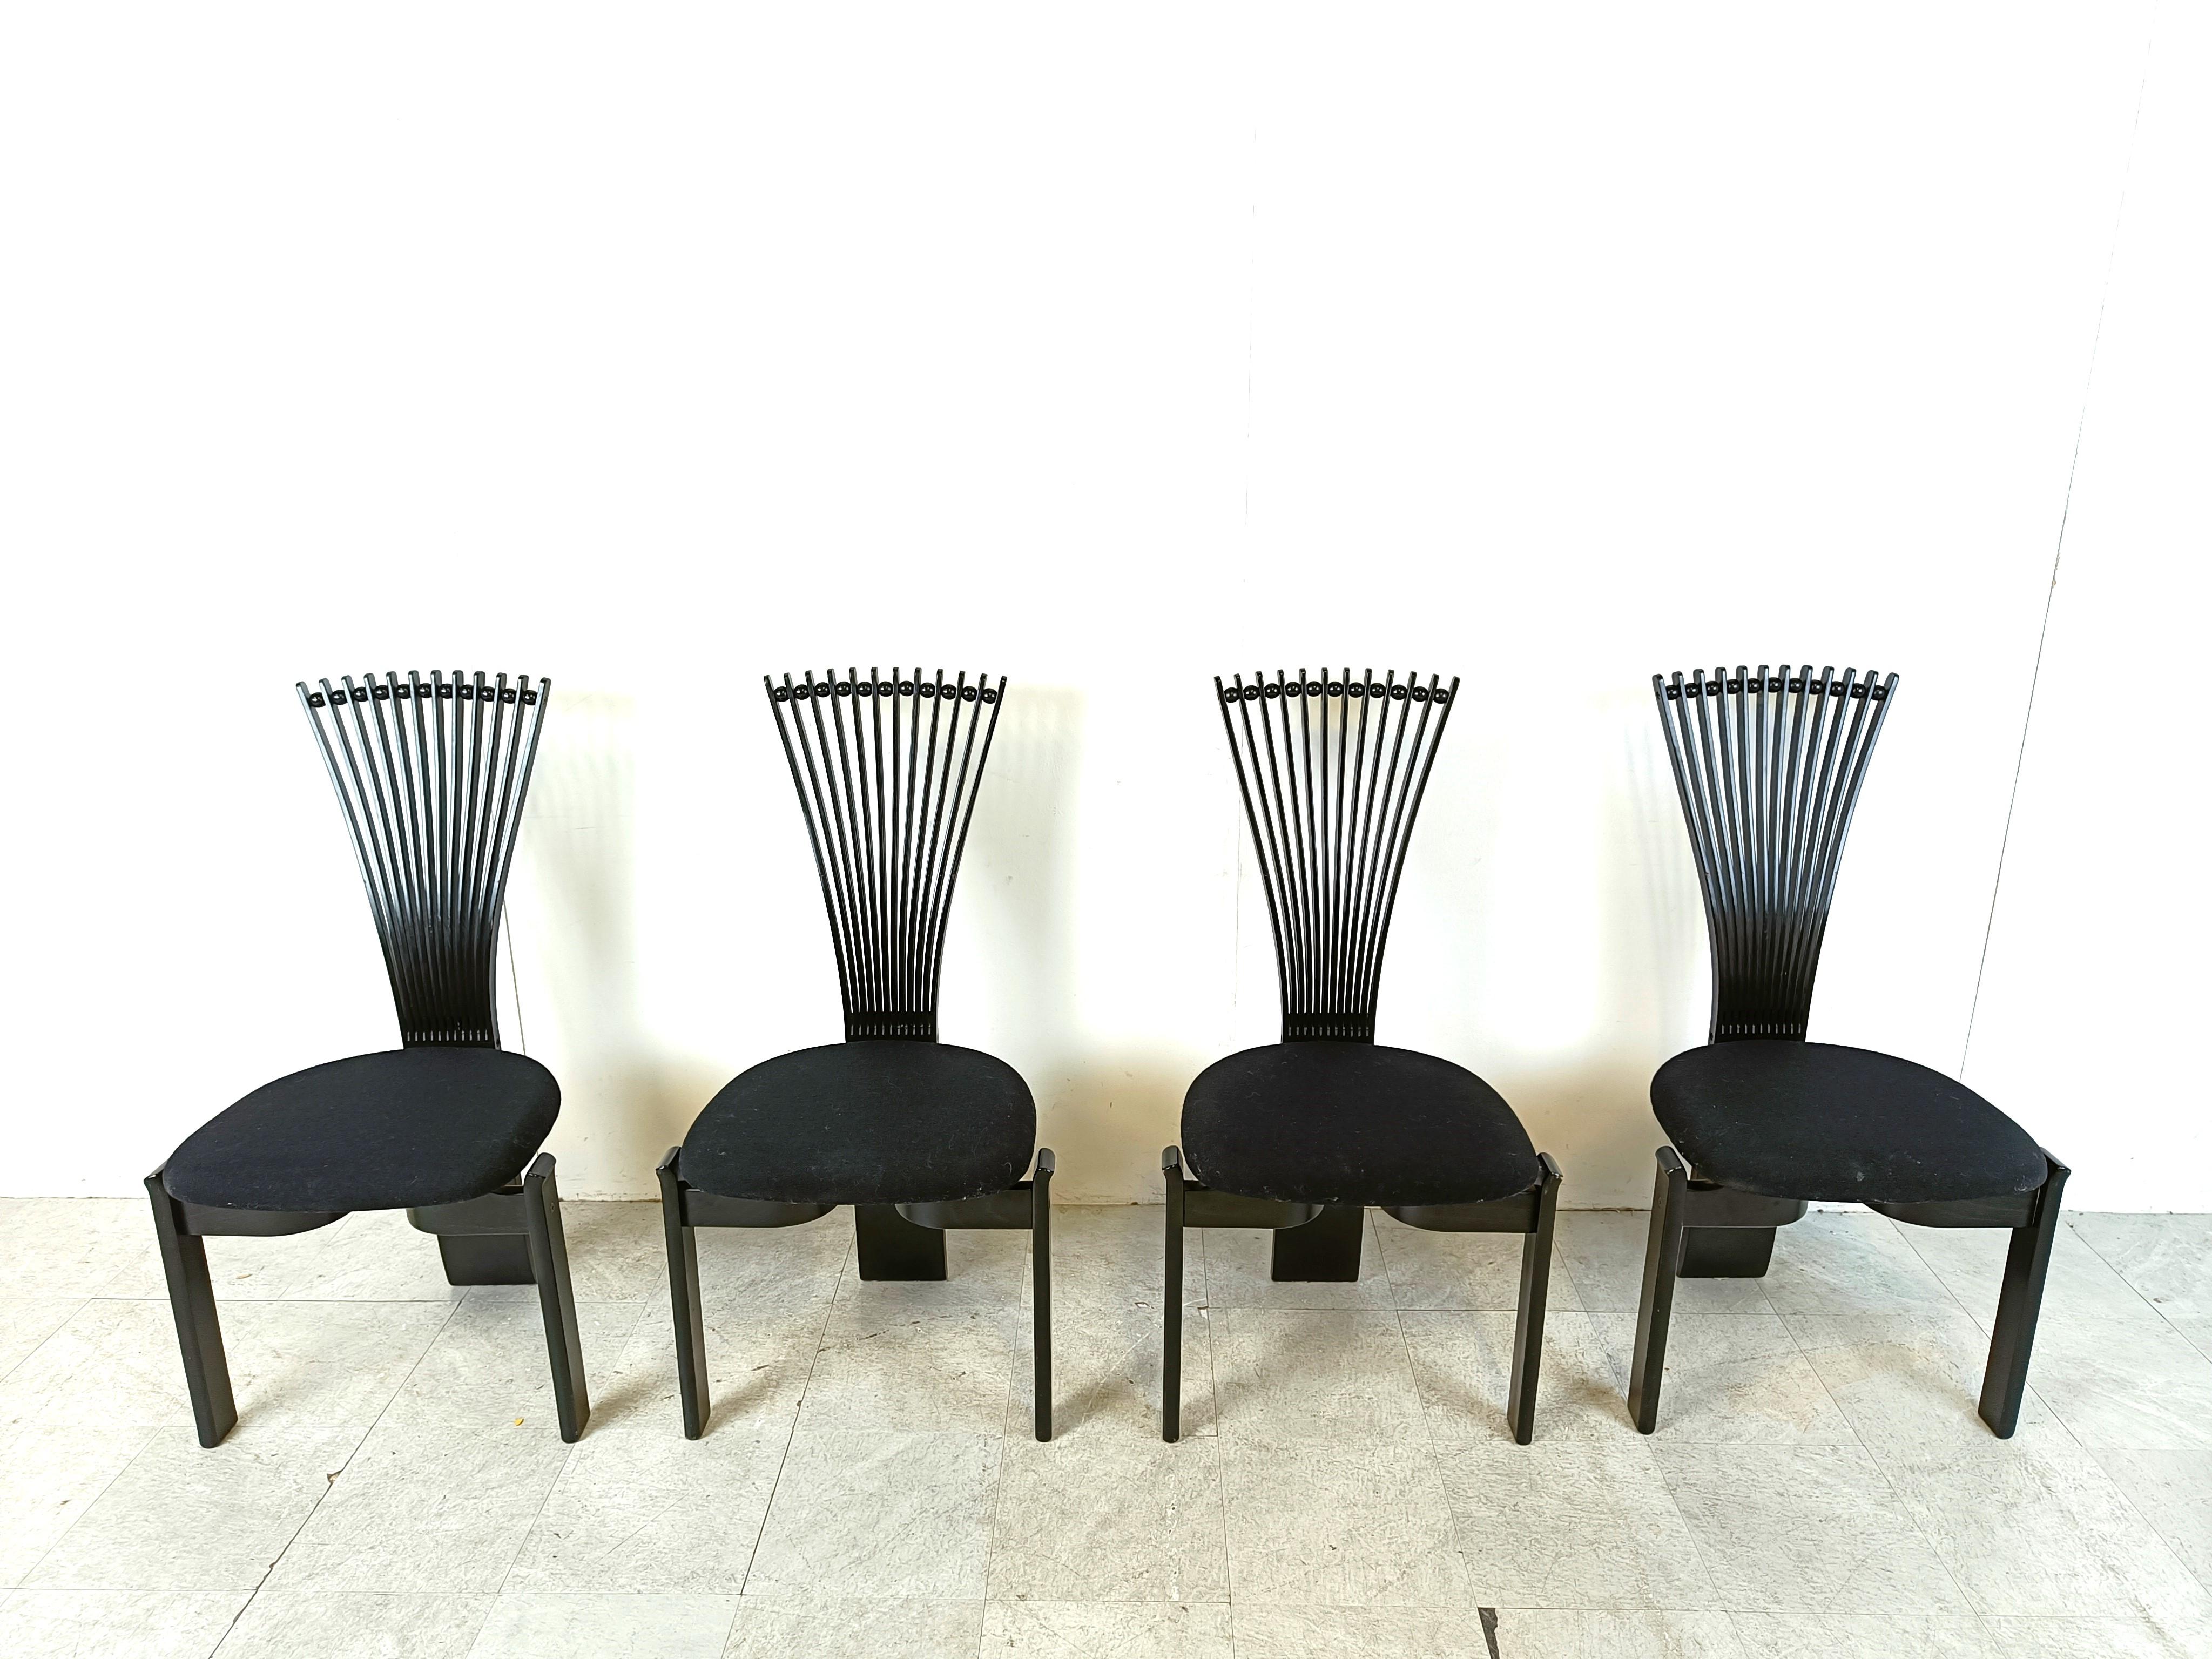 Post-Modern Totem chairs by Torstein Nislen for Westnofa, 1980s For Sale